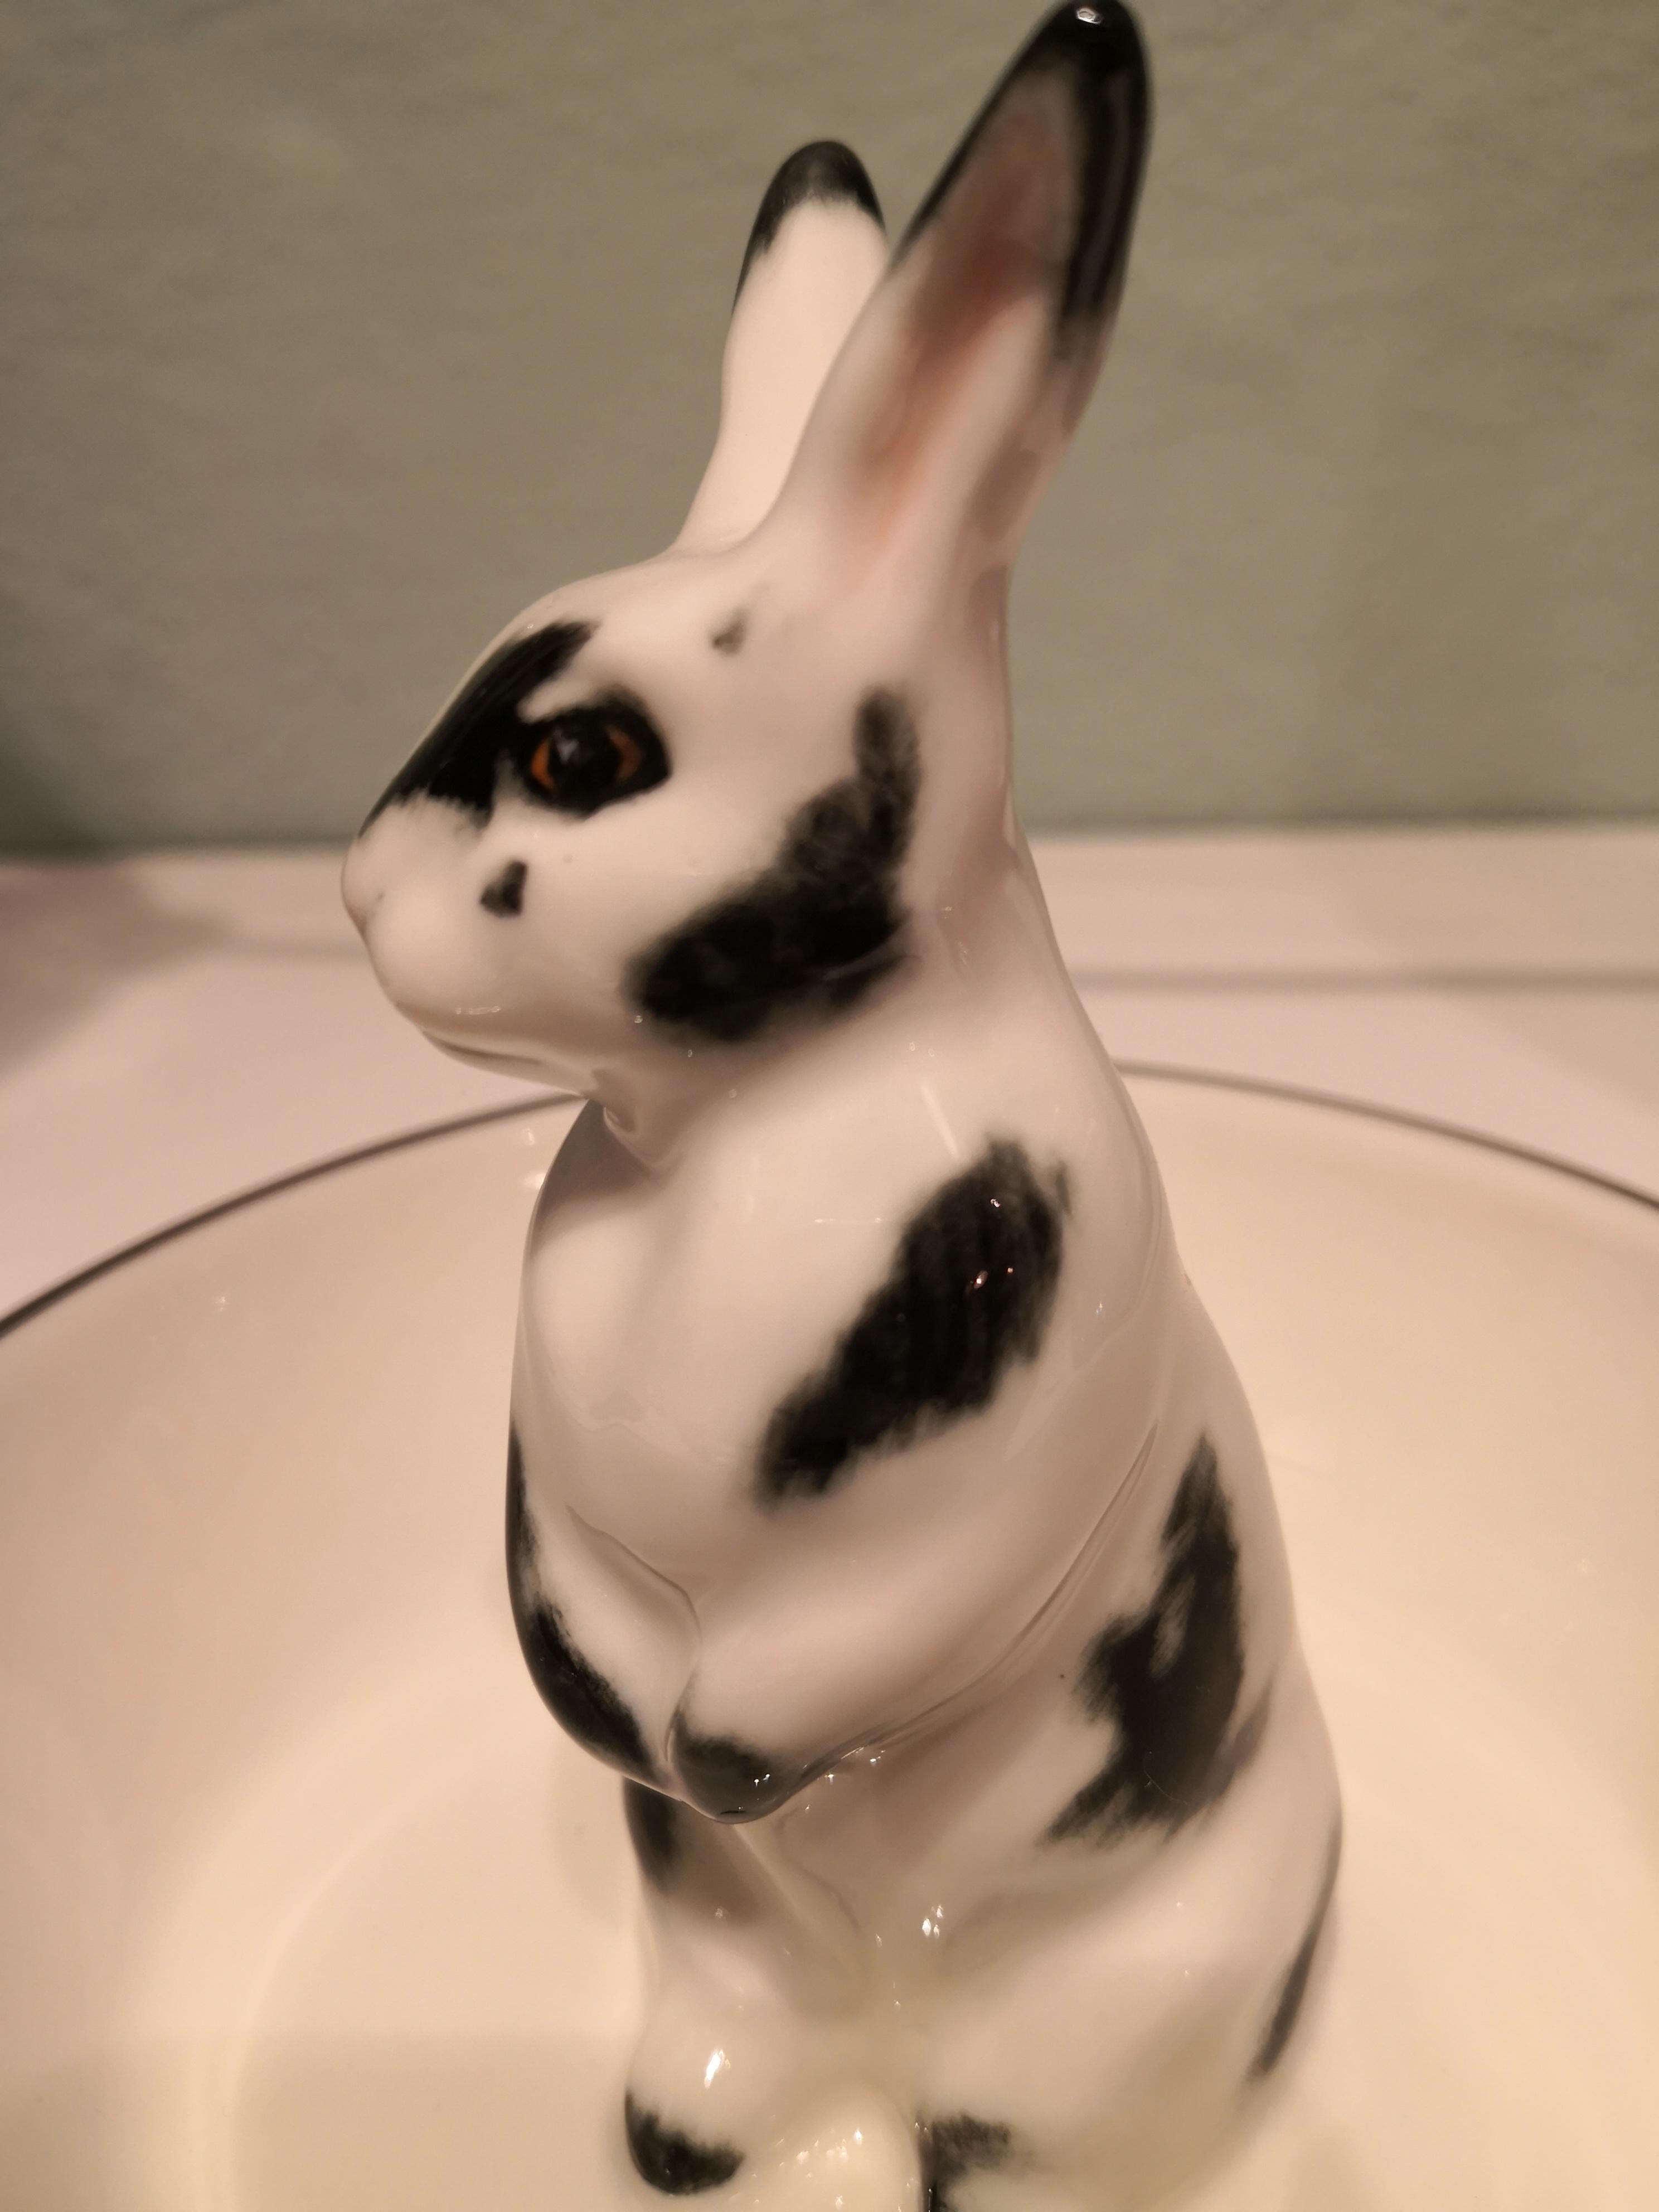 Completely handmade porcelain bowl with a hands-free naturalistic painted Easter bunny figure with black spots in country style. The bunny is sitting in the middle of the bowl for decorating nuts or sweets around. Rimmed with a platinum line.